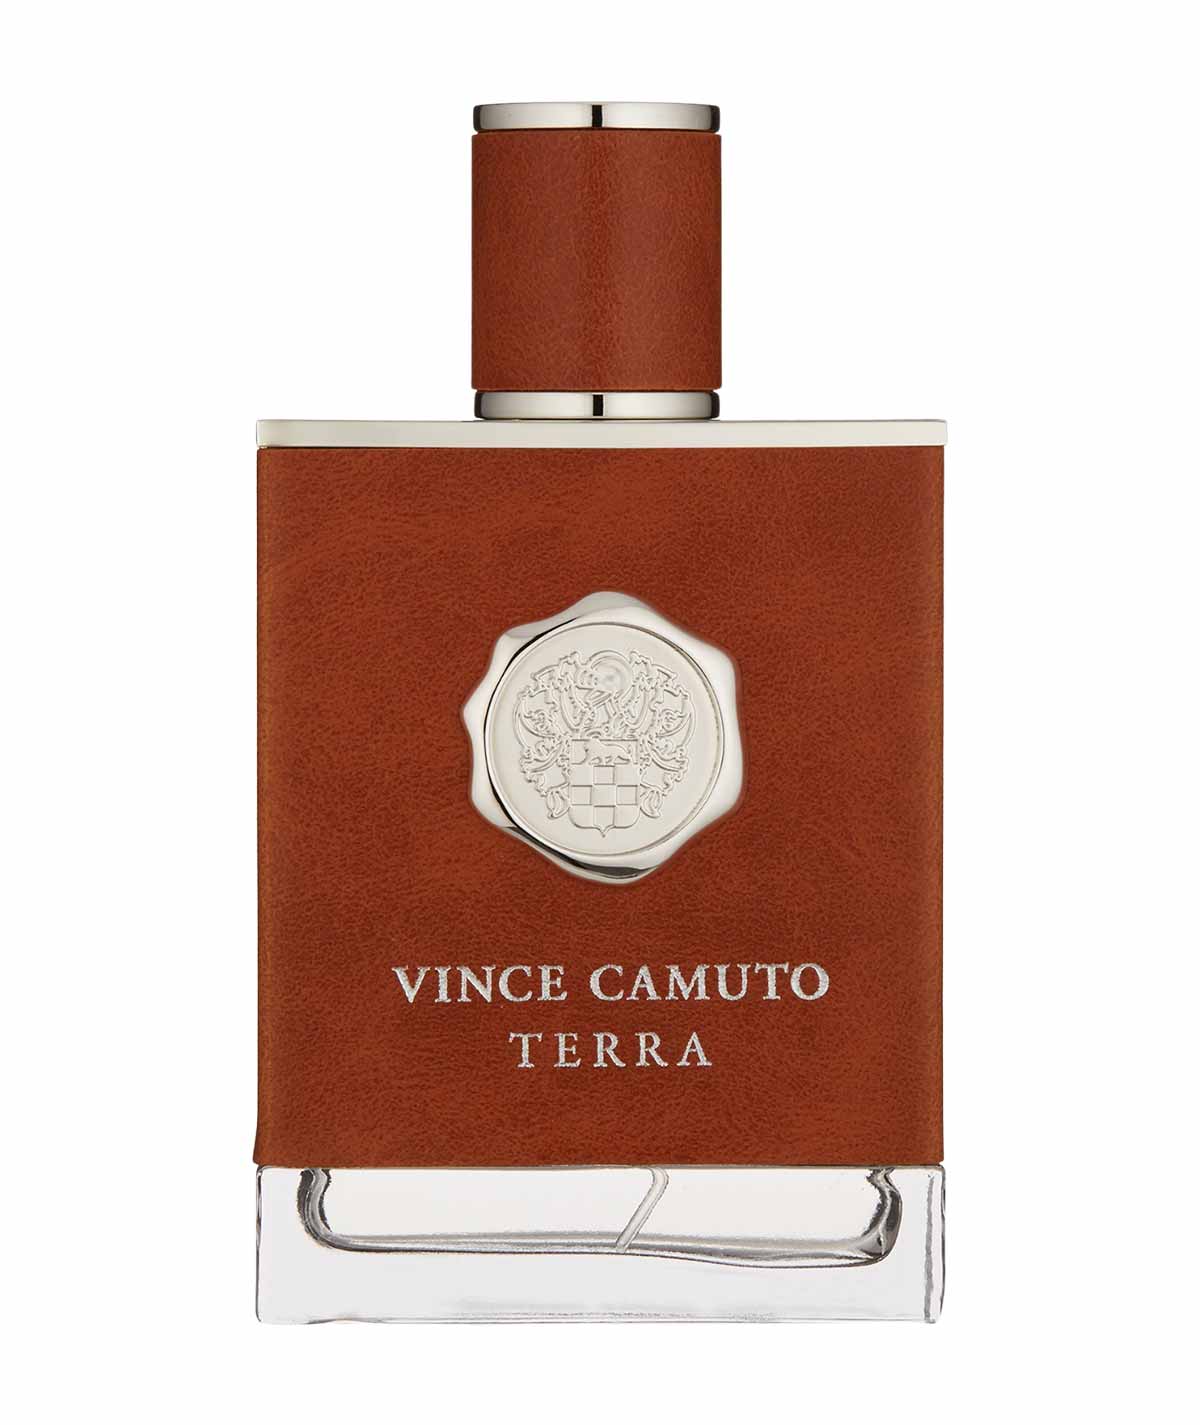 Best Vince Camuto Perfume - FragranceReview.com